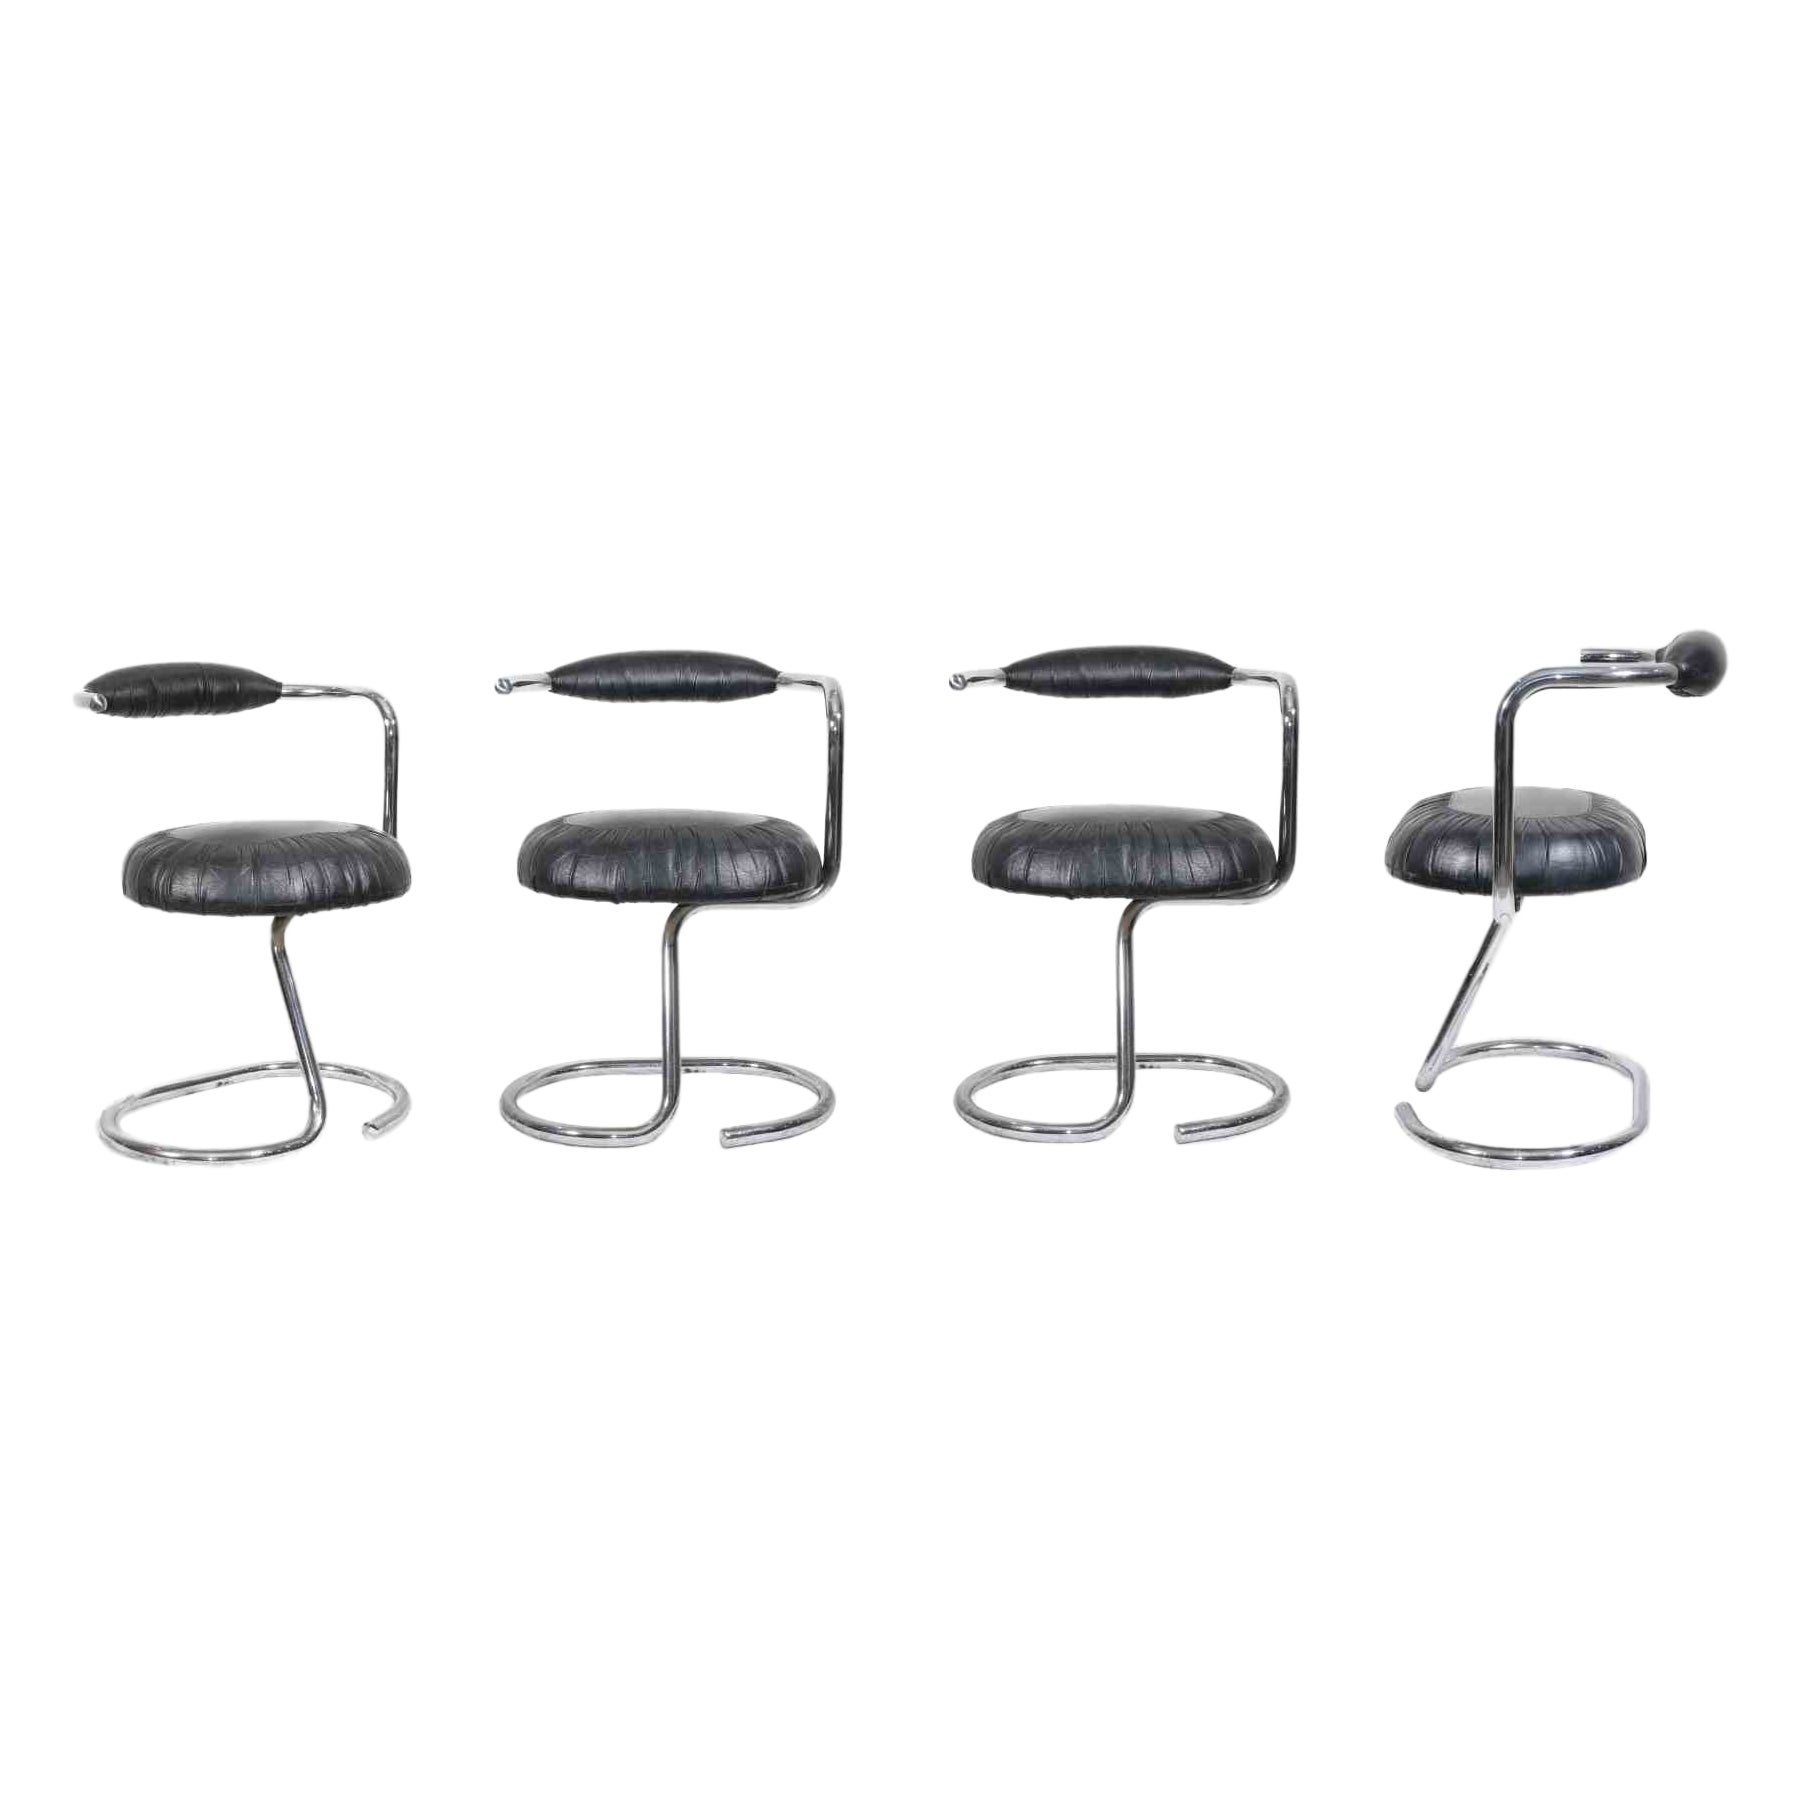 Set of 4 Black Cobra Chairs by Giotto Stoppino, Italy, 1970s For Sale